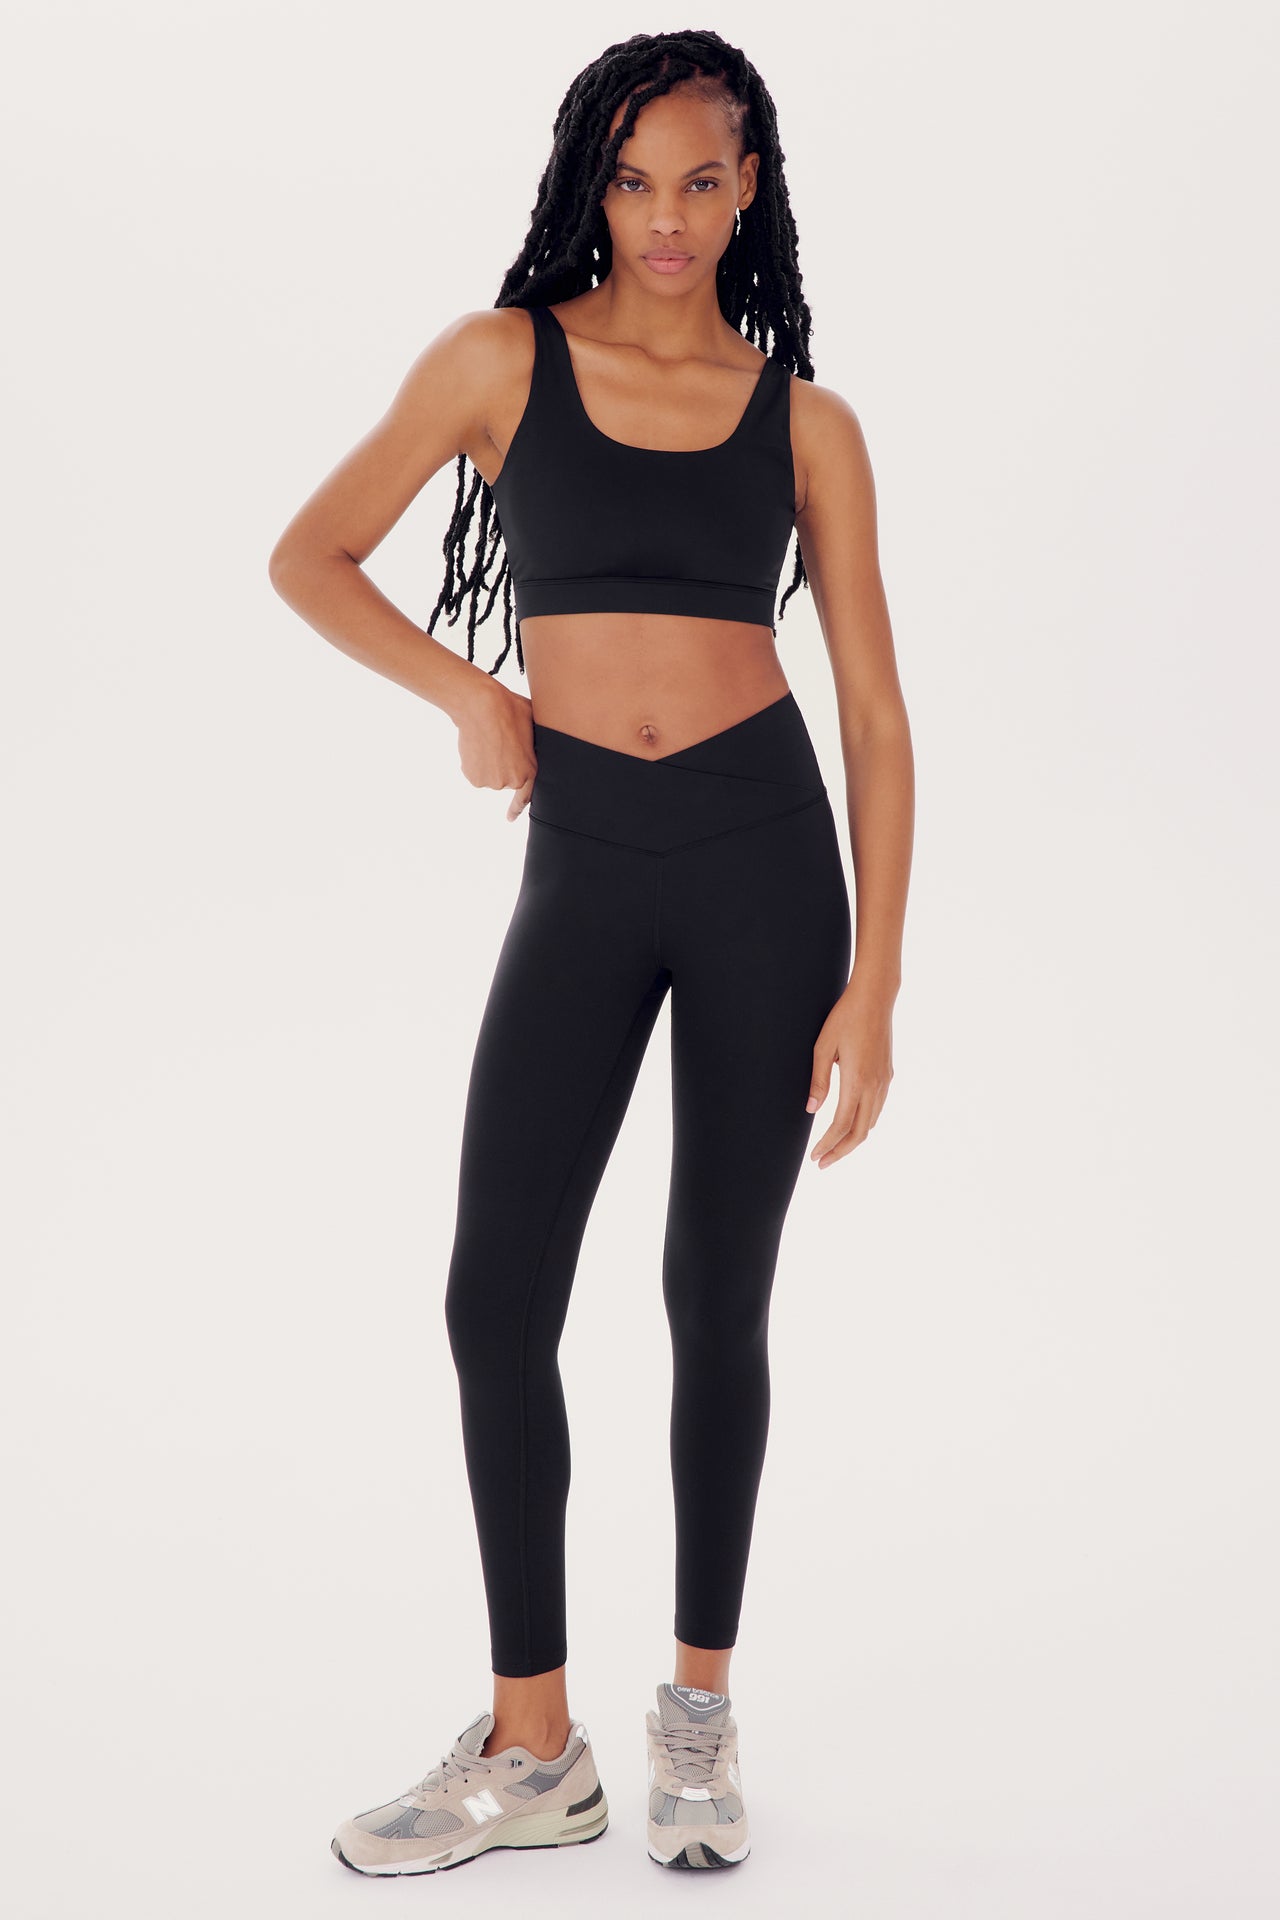 A woman in a SPLITS59 Sprint Rigor Bra in Black and athletic wear stands confidently against a white background, ready for multi-sport performance.